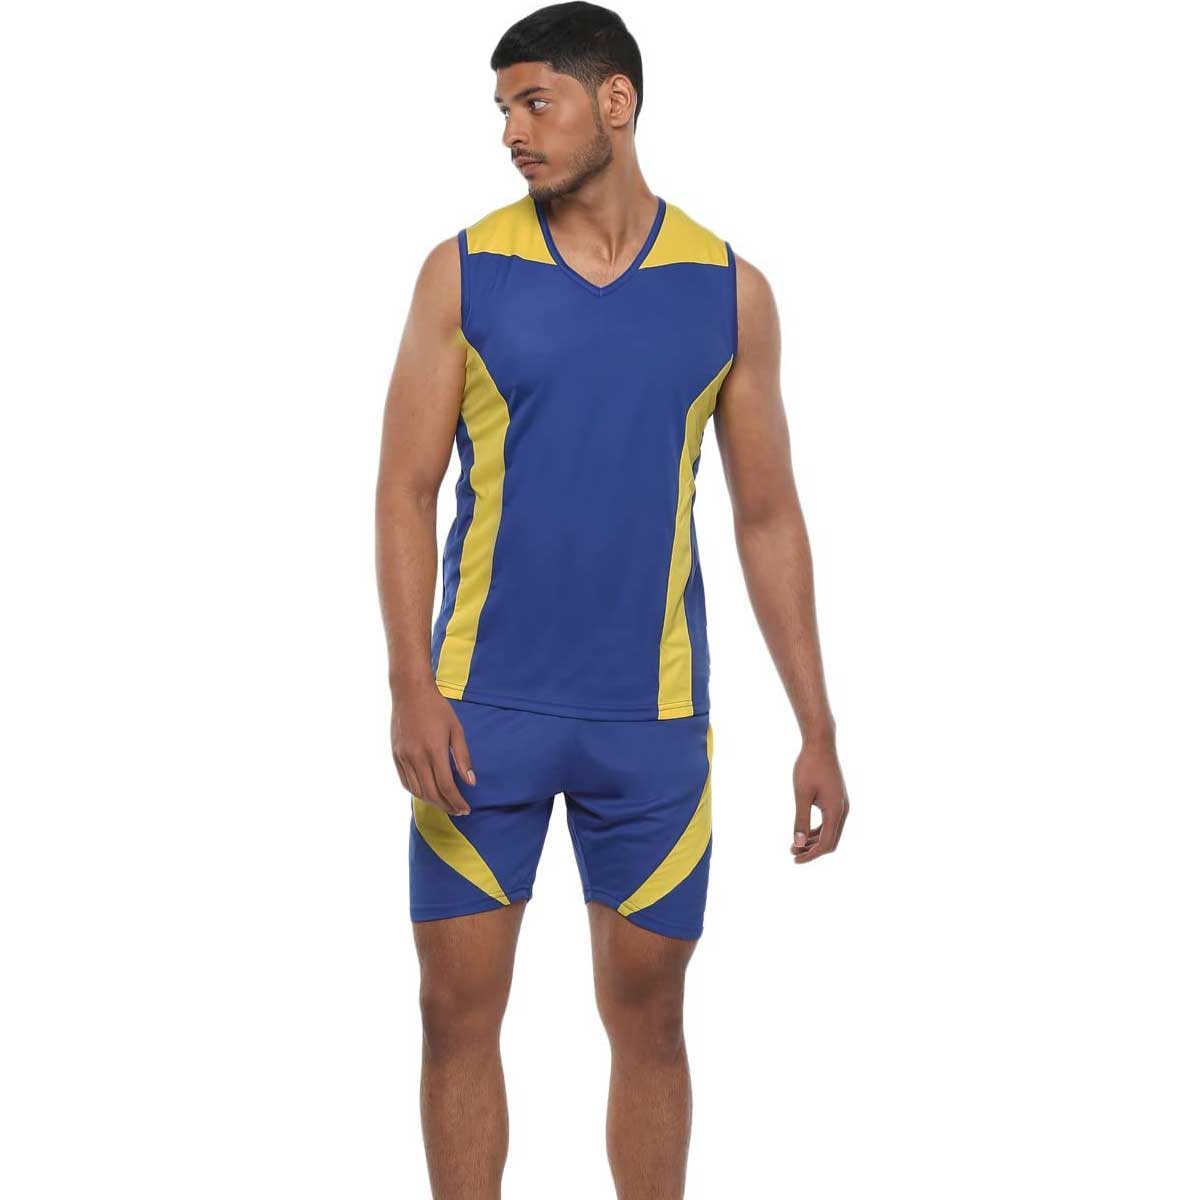 Cut and Sew Volleyball Jersey Manufacturers in Iran